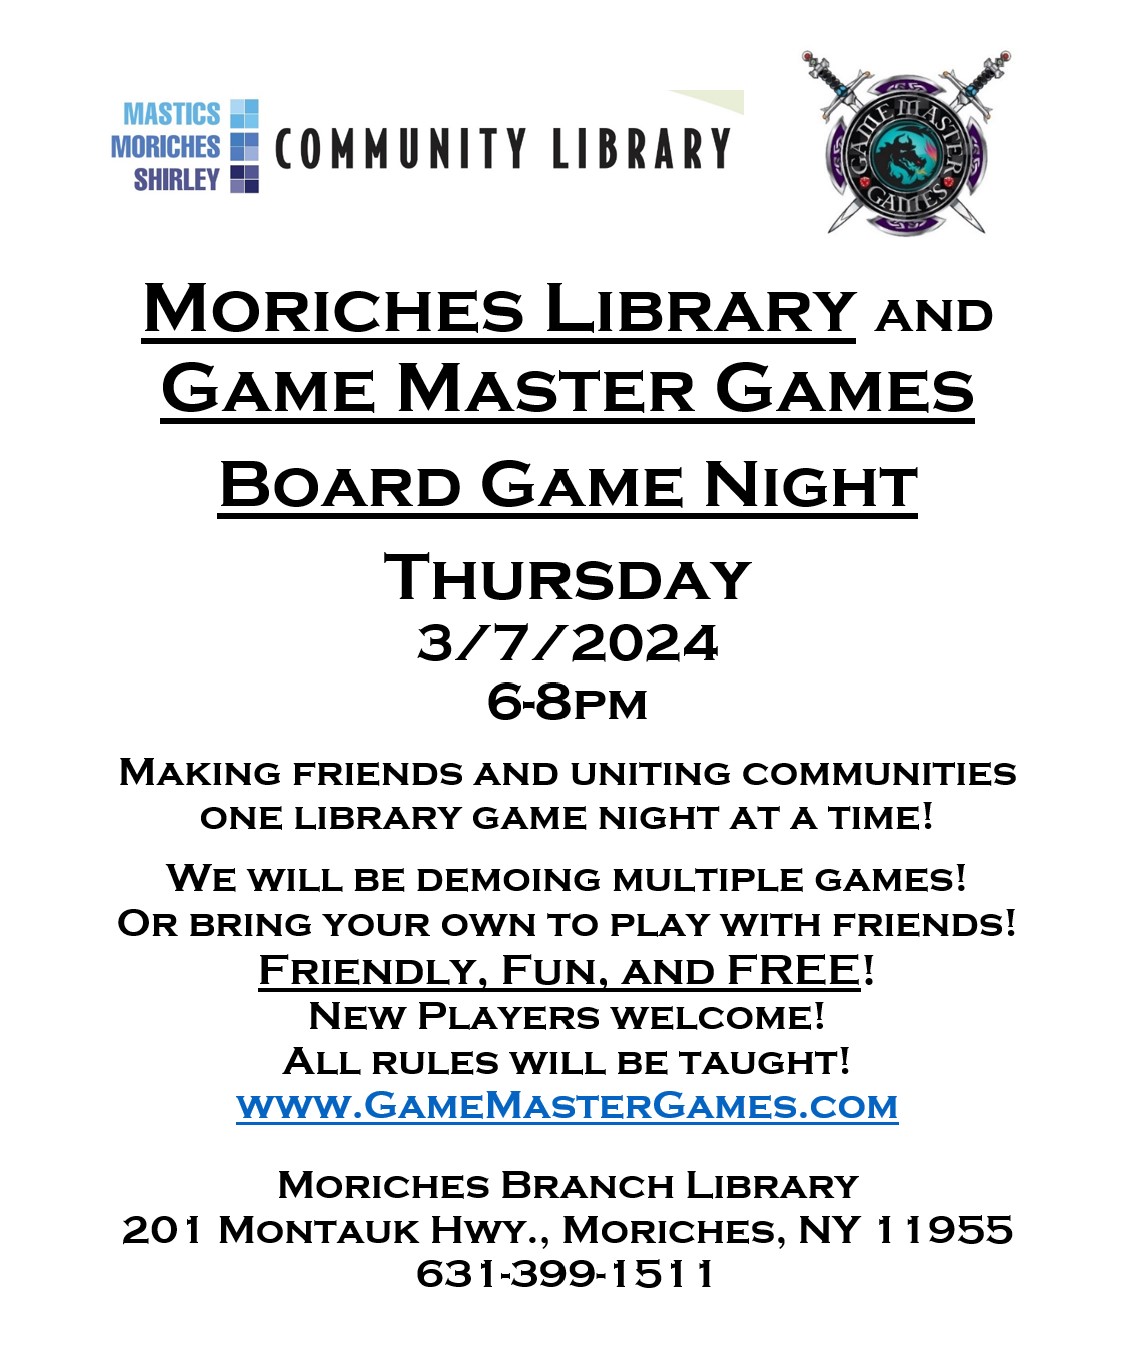 Have fun and make some new friends! Board Game Night at the Moriches Library!